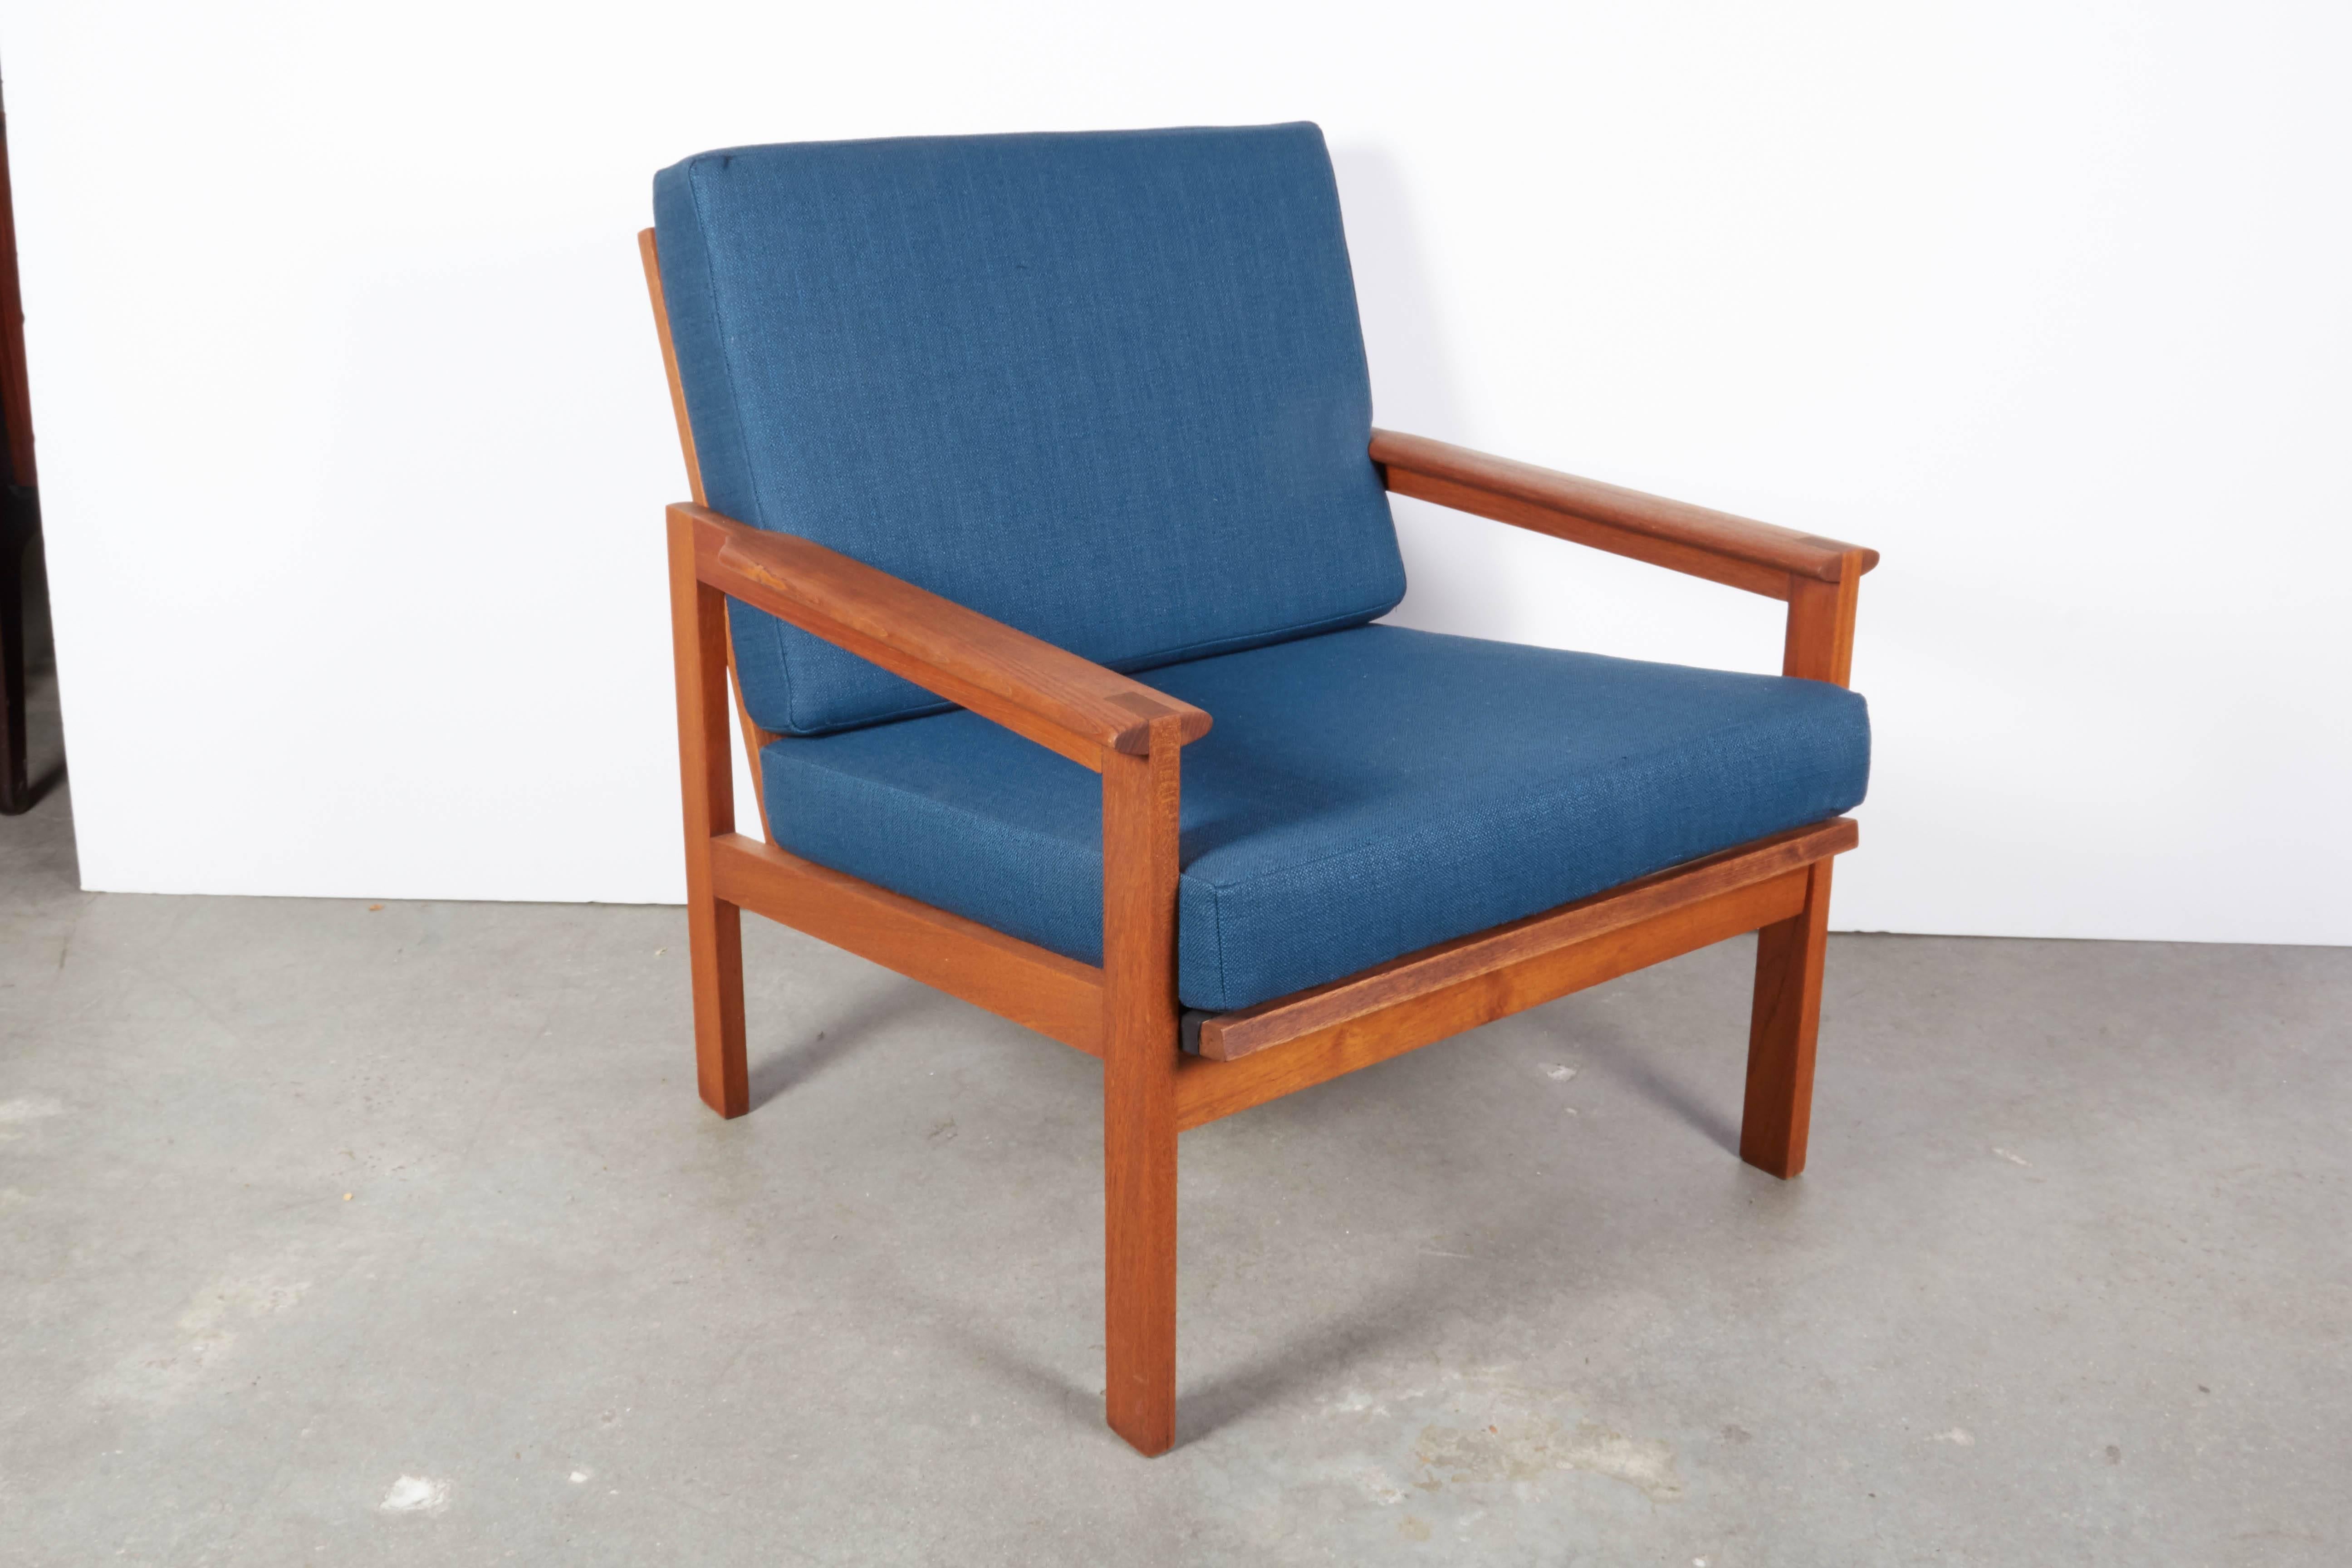 Vintage 1960s Illum Wikkelso Lounge Chairs

These mid century arm chairs are in excellent condition, and are newly upholstered. Sleek, simple and comfortable. Ready for pick up, delivery, or shipping anywhere in the world. 